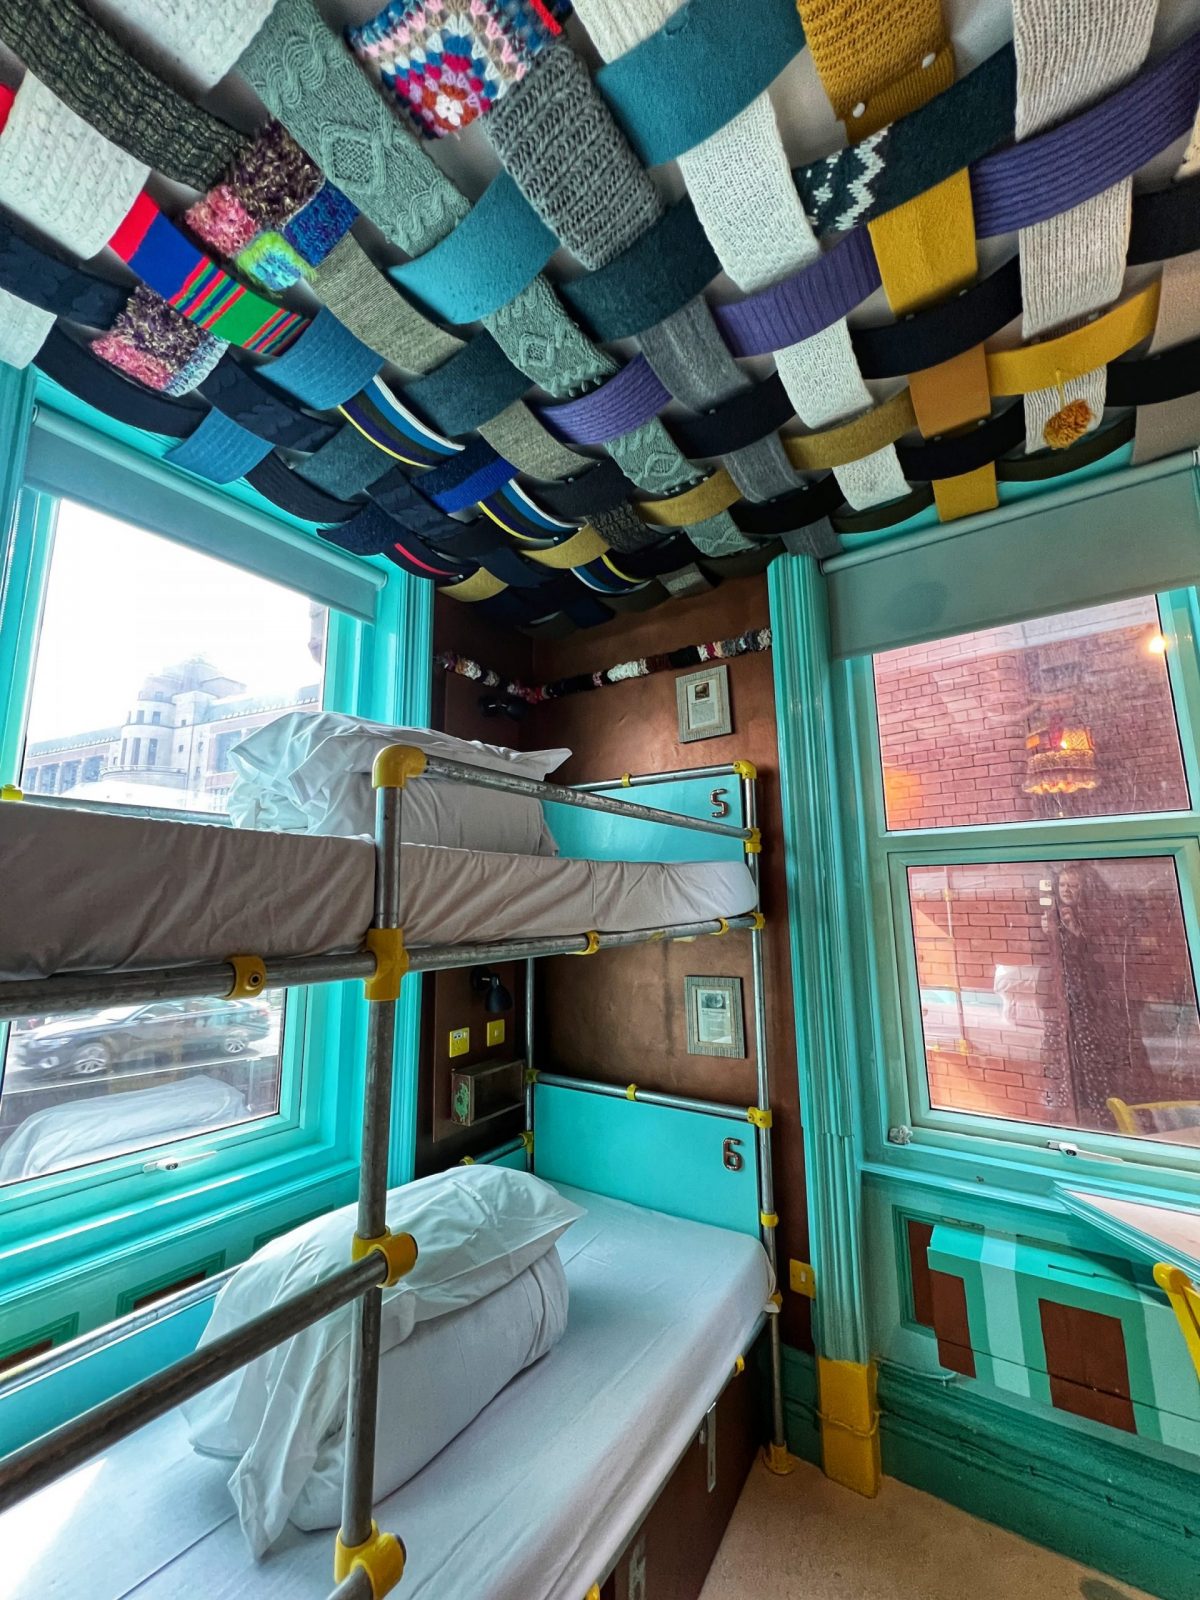 A bunk bed in a room with turquoise walls. 